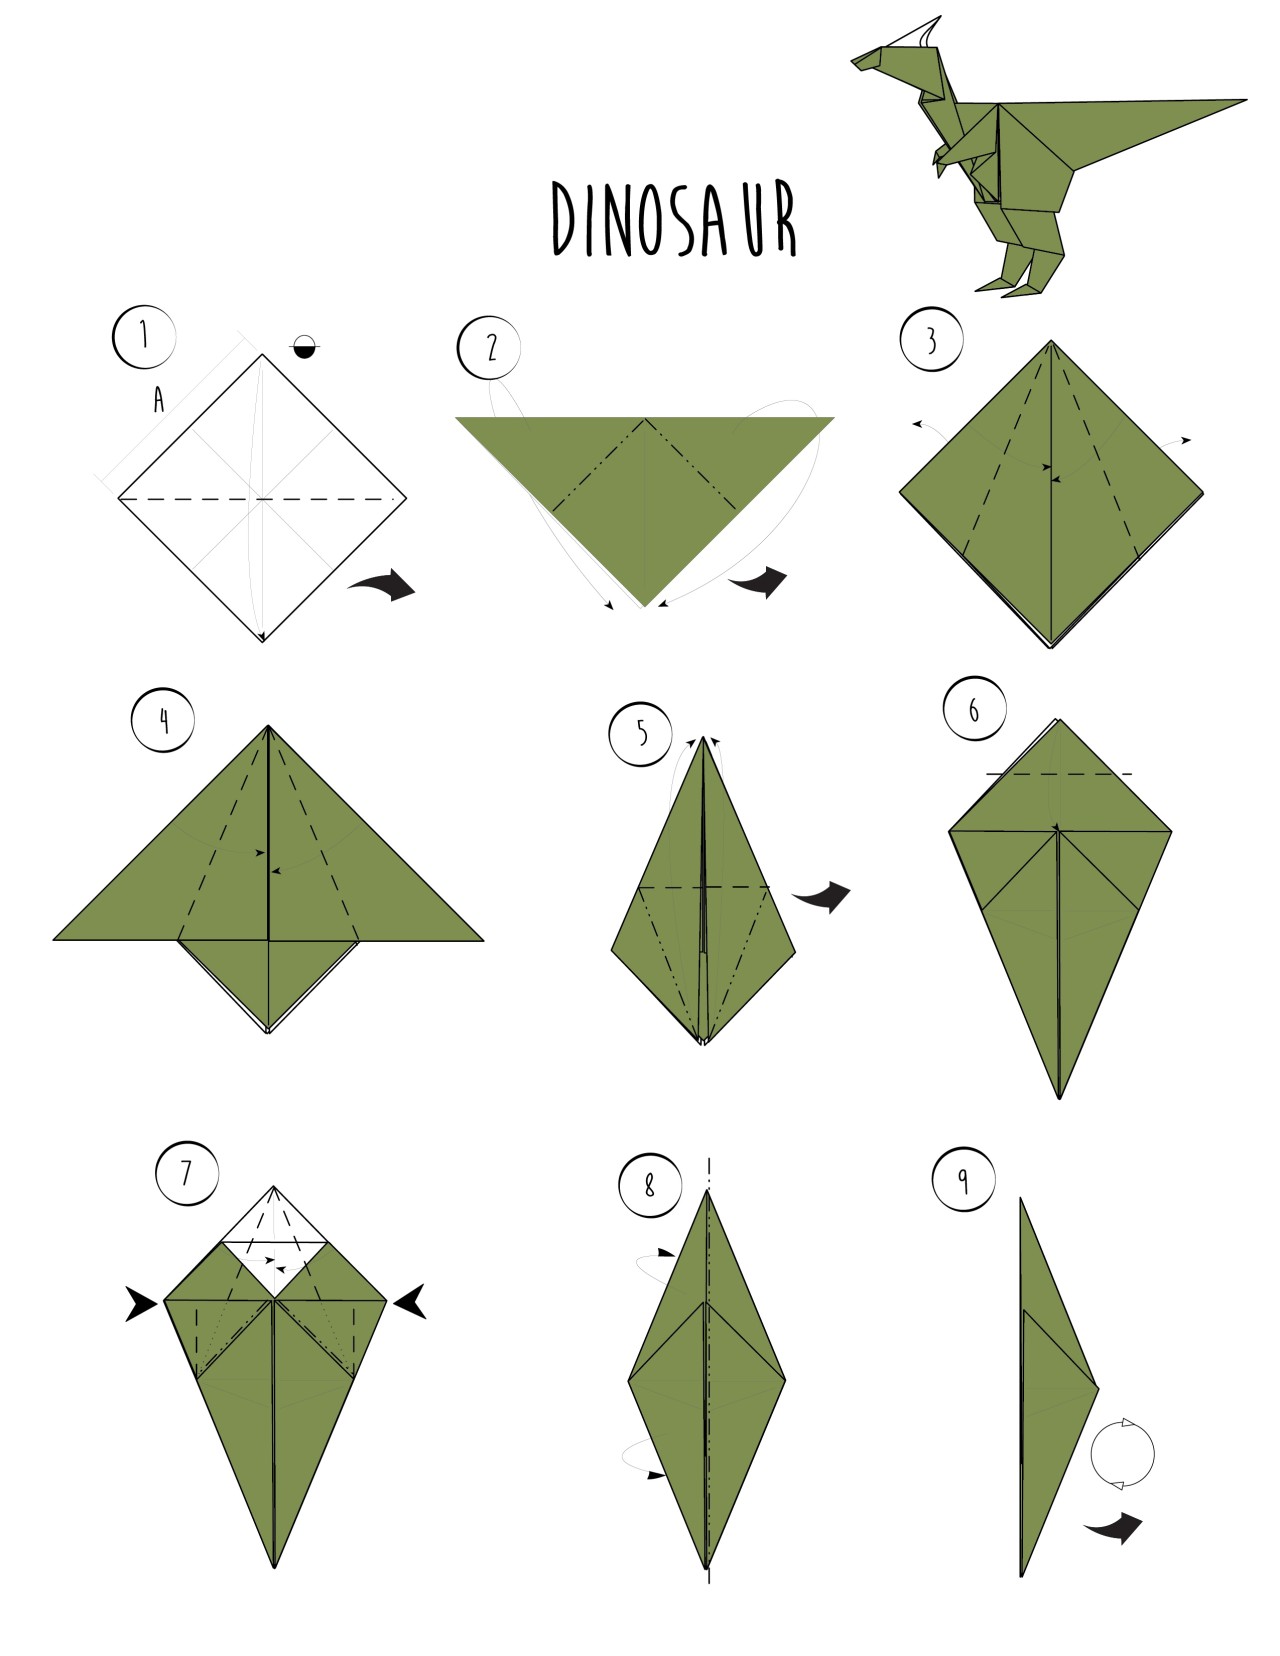 Green Lantern Papercraft Wikihow — Rawr origami Dinosaur and 2 More Ways to Make